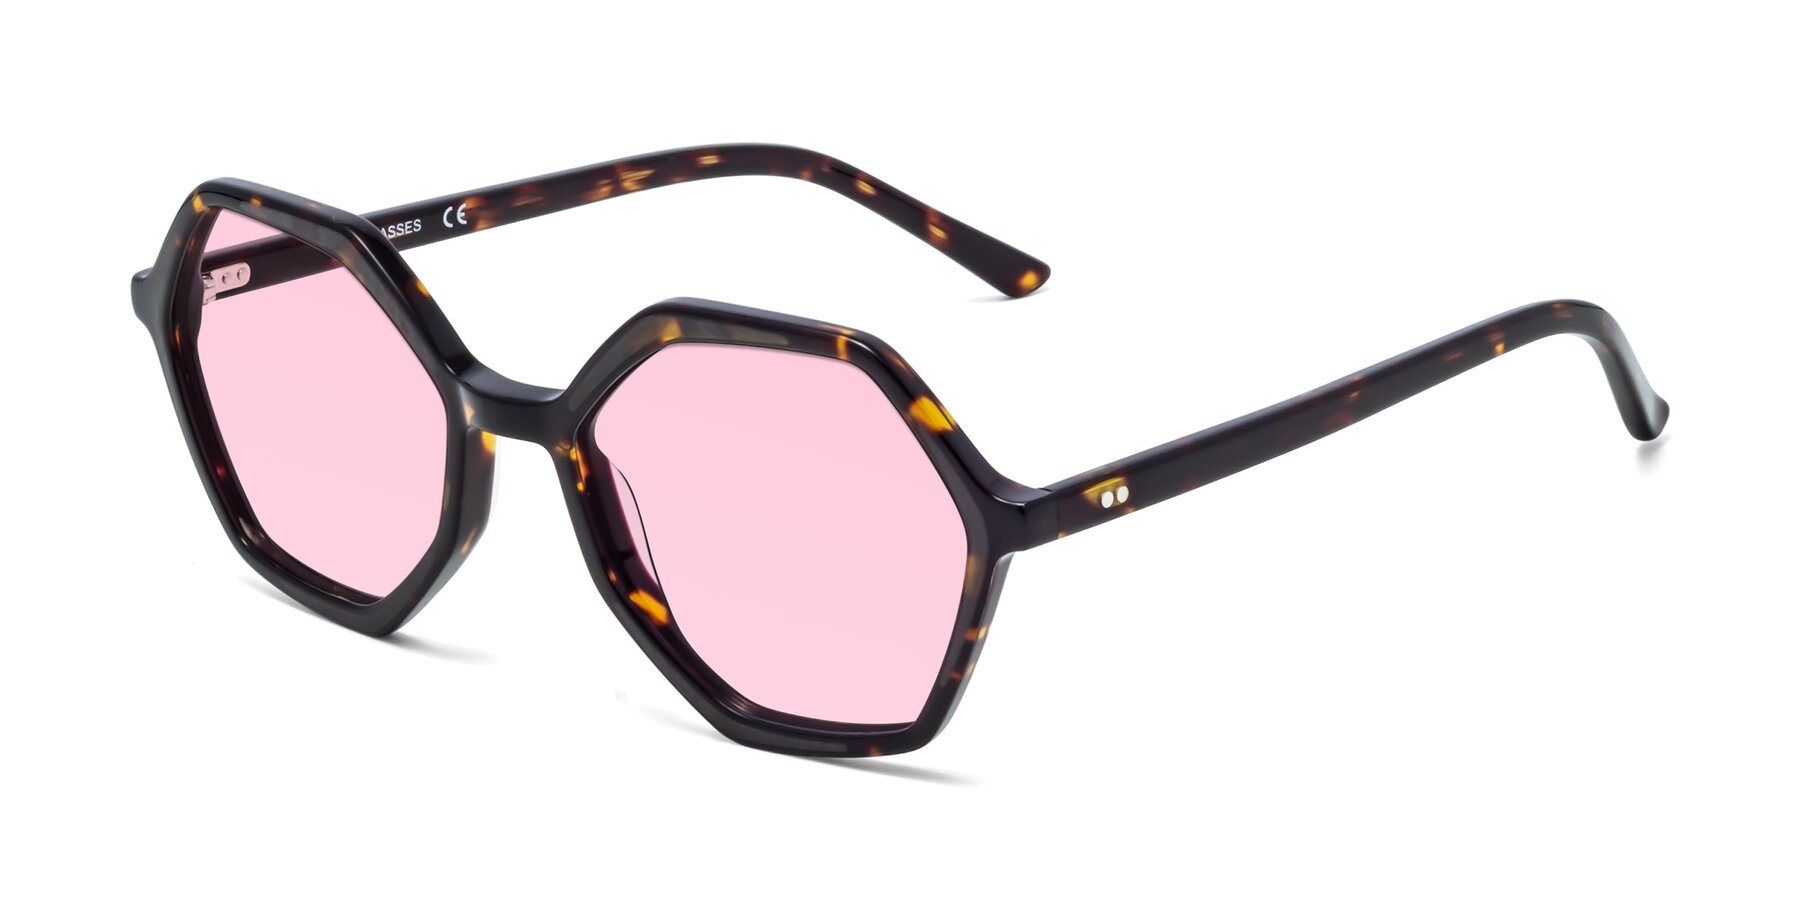 Angle of 1489 in Tortoise with Light Pink Tinted Lenses